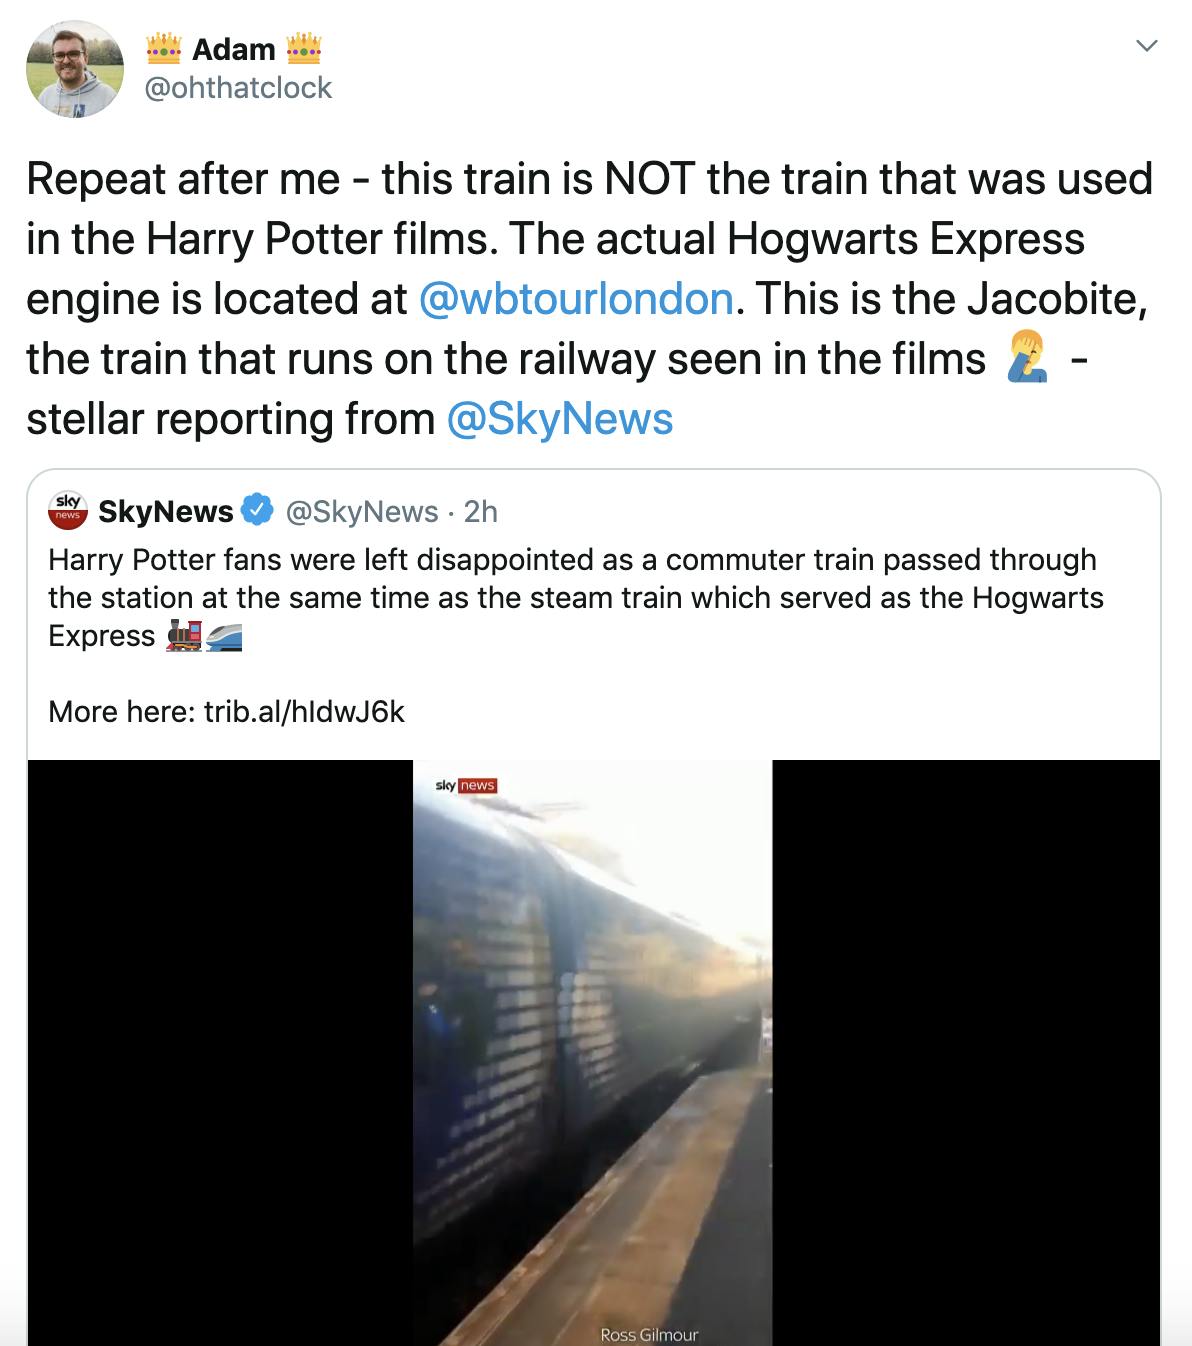 "Repeat after me - this train is NOT the train that was used in the Harry Potter films. The actual Hogwarts Express engine is located at  @wbtourlondon . This is the Jacobite, the train that runs on the railway seen in the films Man facepalming - stellar reporting from  @SkyNews" Embedded tweet from sky news featuring footage of the trains and the text "Harry Potter fans were left disappointed as a commuter train passed through the station at the same time as the steam train which served as the Hogwarts Express Steam locomotiveHigh-speed train"